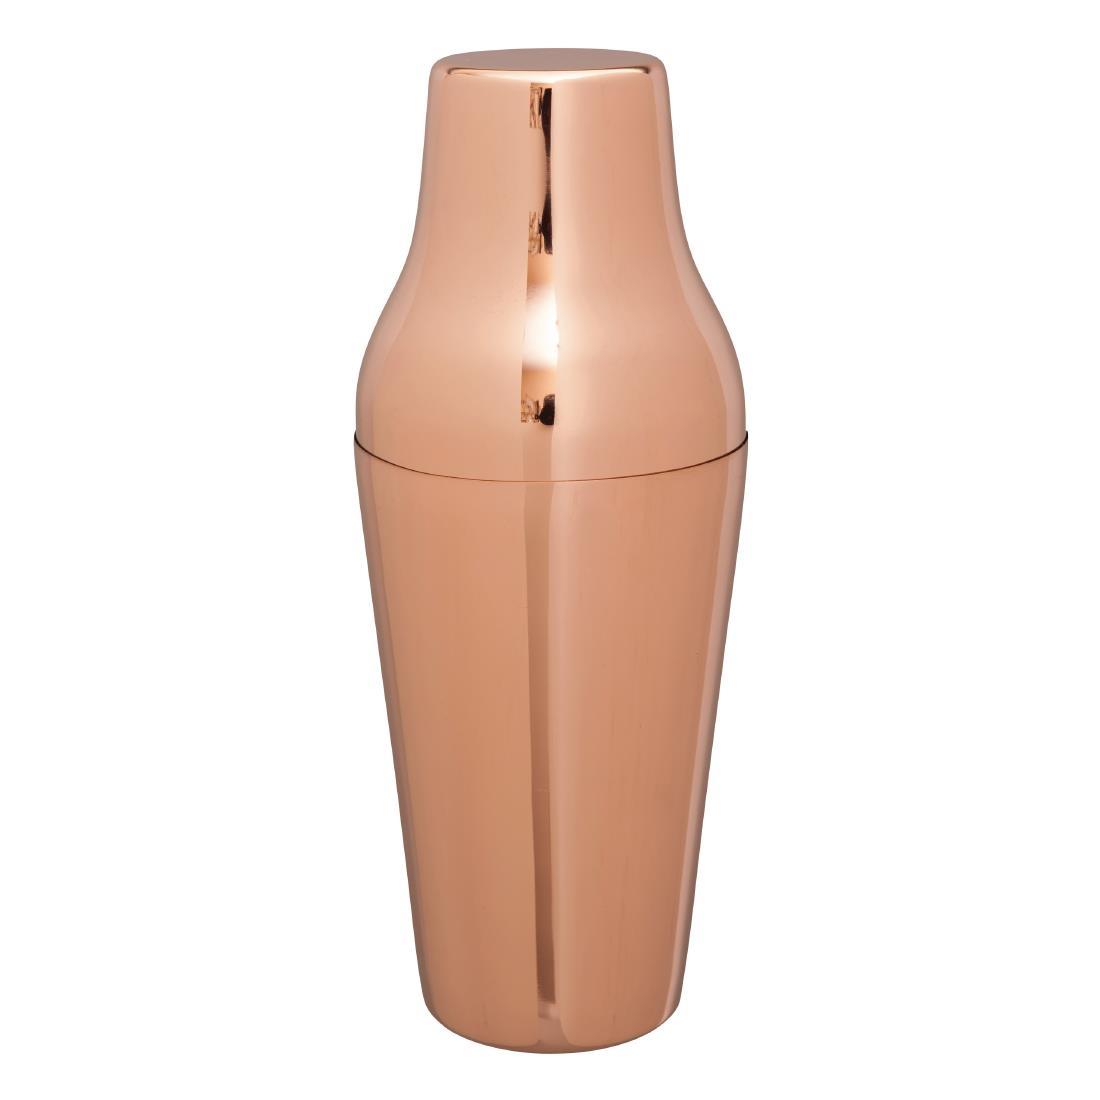 Beaumont French Cocktail Shaker Copper - GK959  - 1